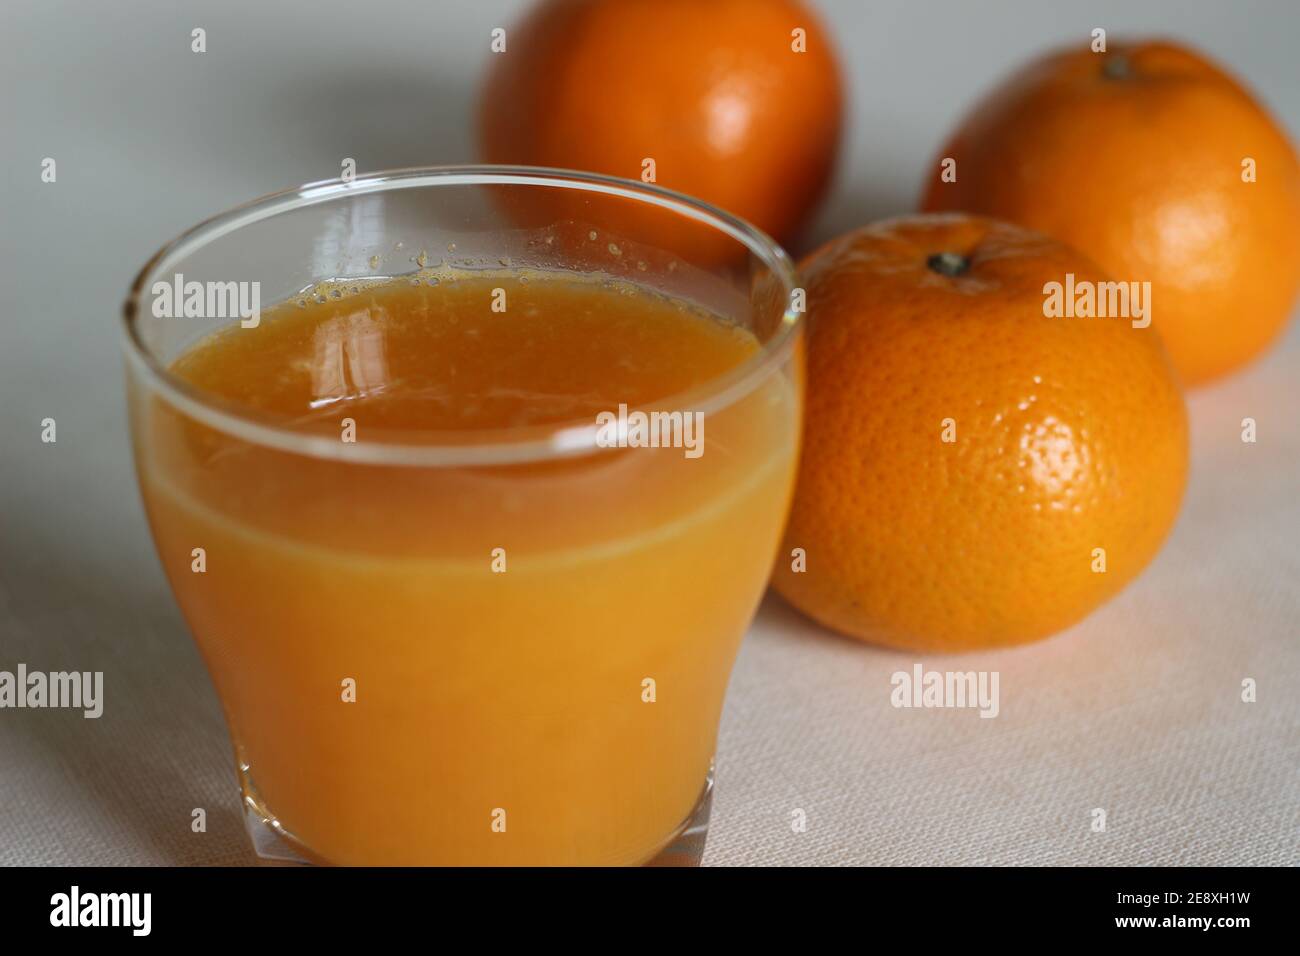 Homemade pure Malta orange juice. Malta is citrus fruit grown in India. It is commonly called as sangtra. Stock Photo